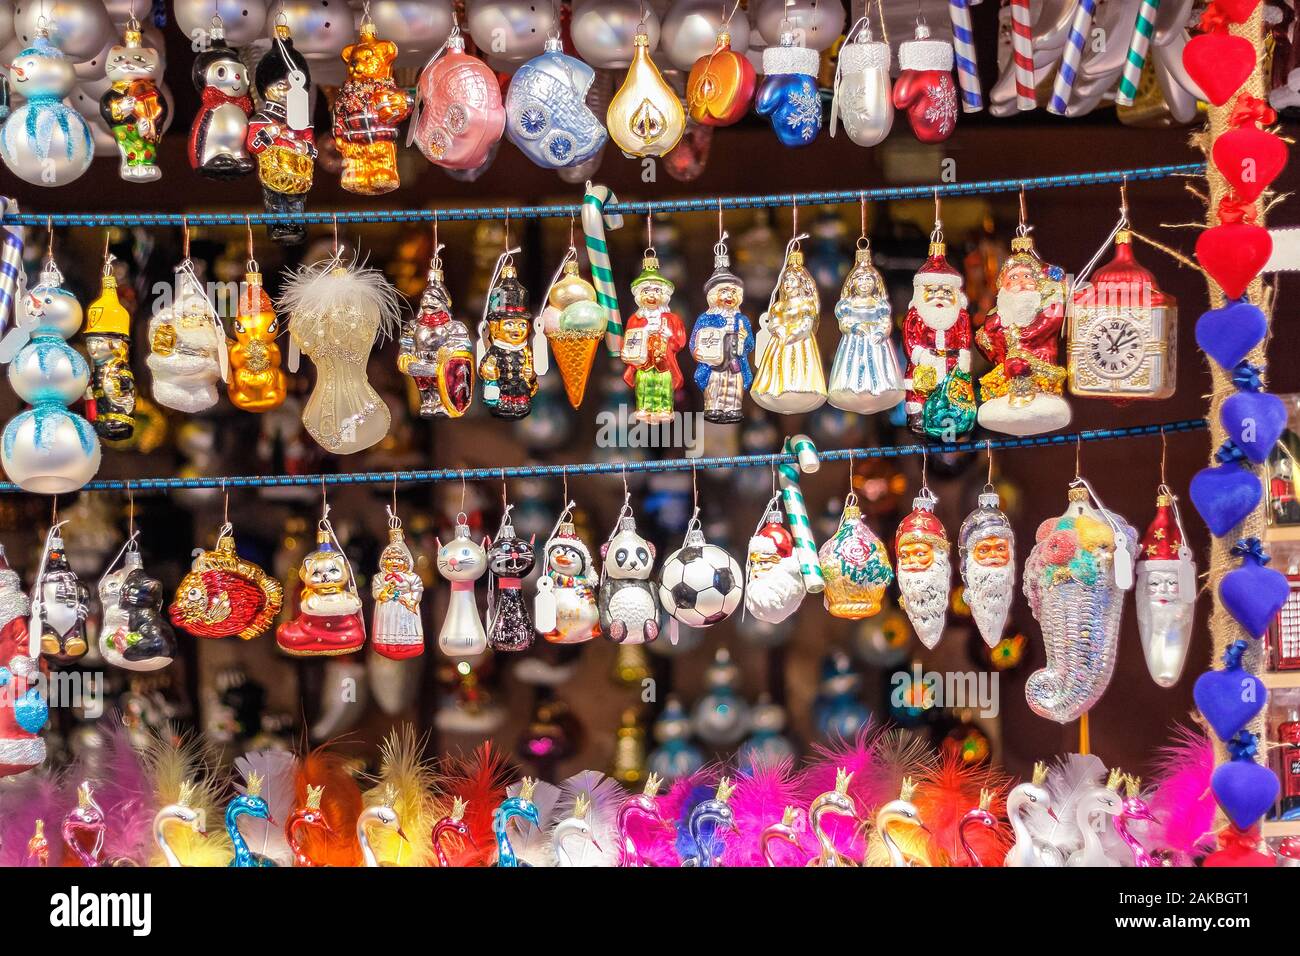 Christmas tree ornaments on display at Christmas market in winter wonderland of London Stock Photo